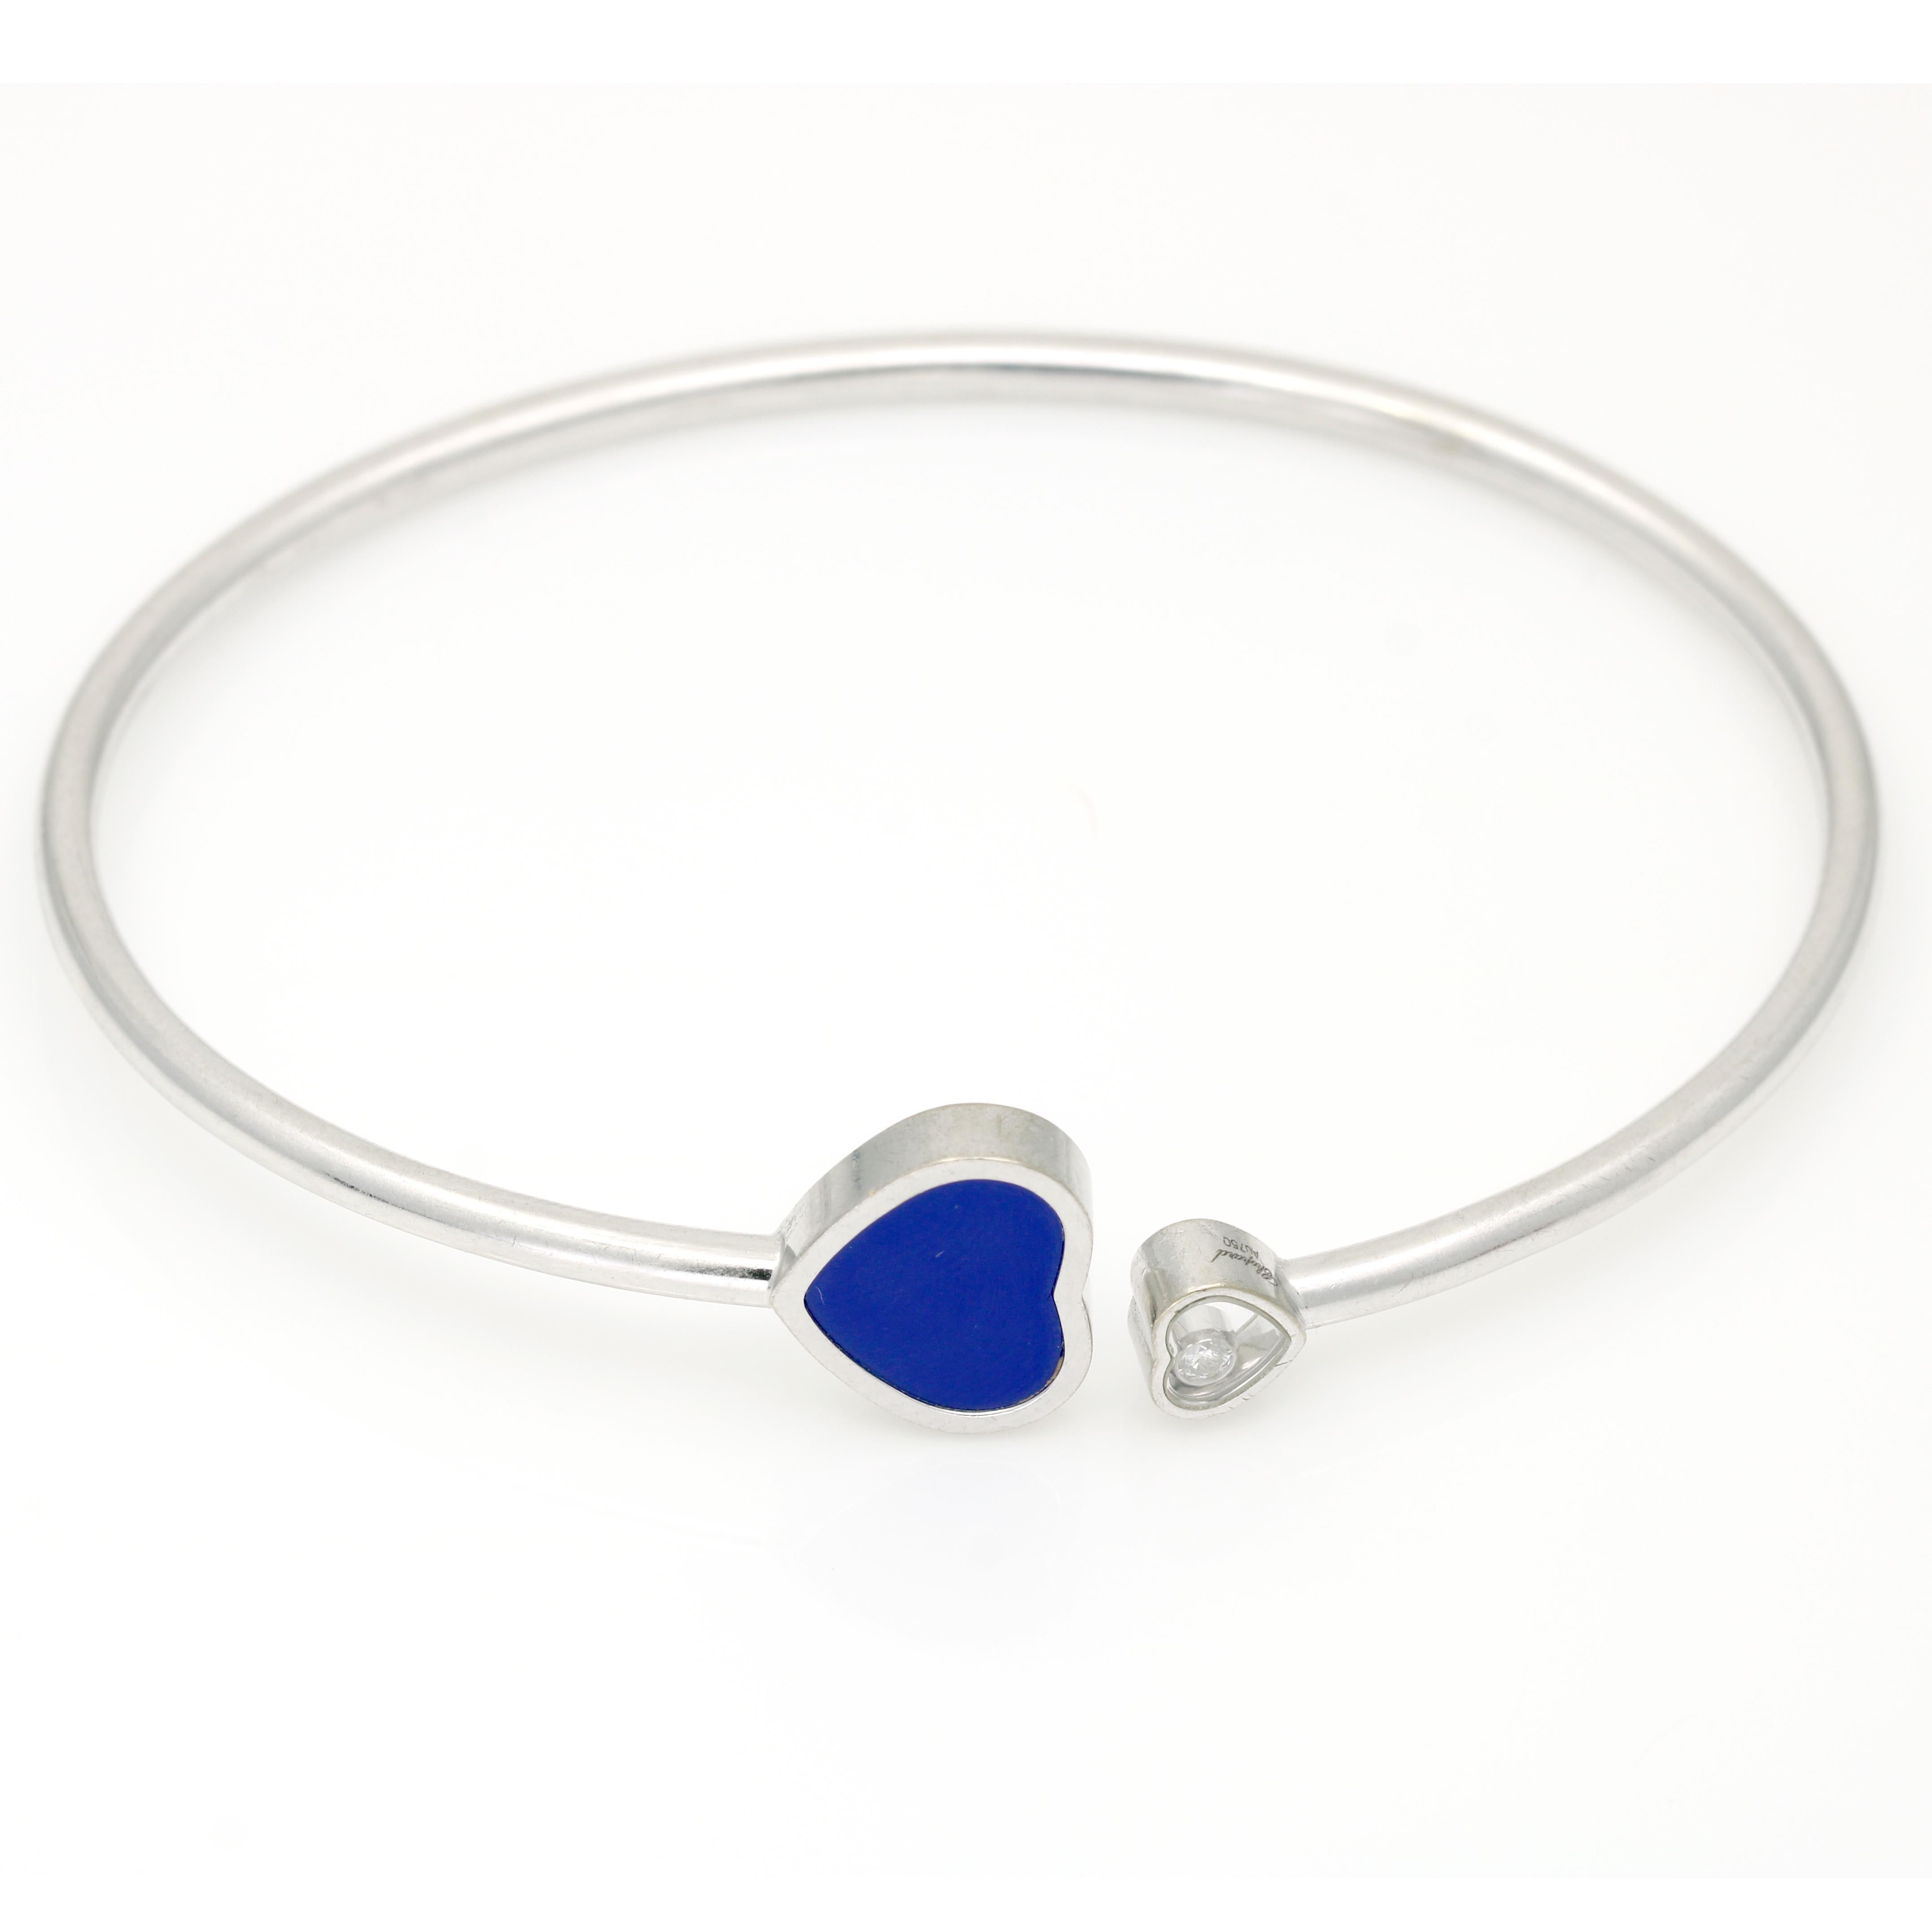 Embrace elegance and emotion with the Chopard Happy Hearts Bangle Bracelet, a captivating expression of love and luxury. This exquisite bracelet features the iconic Happy Hearts design, adorned with a delicate floating diamond and captivating Lapis